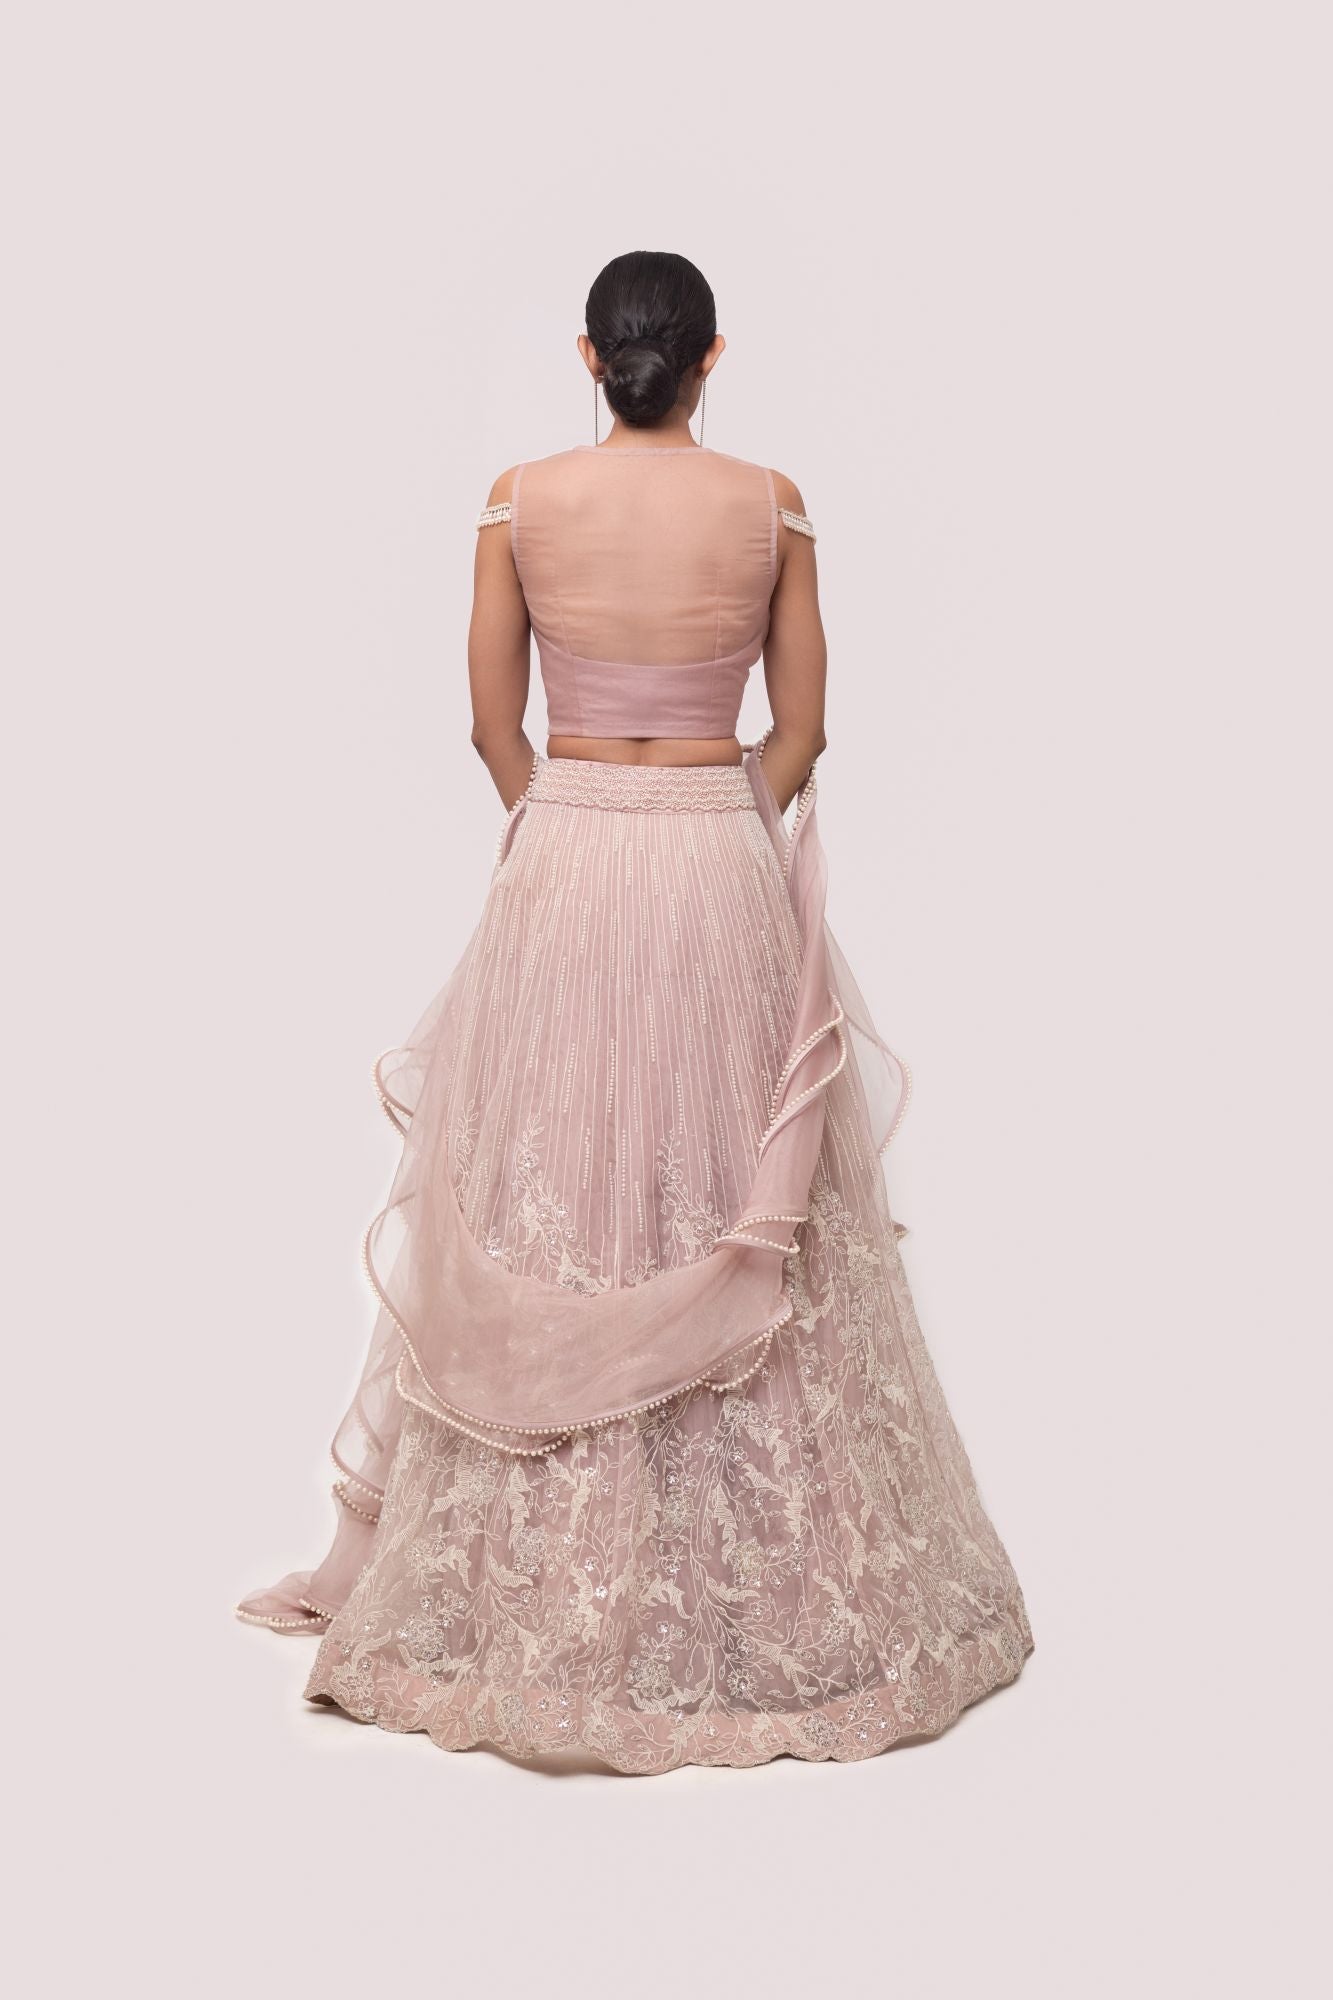 Buy a Beautiful pink floral short net sleeves lehenga featuring pearl and thread embroidery. The lehenga is perfect for weddings and sangeet parties. Shop online from Pure Elegance.